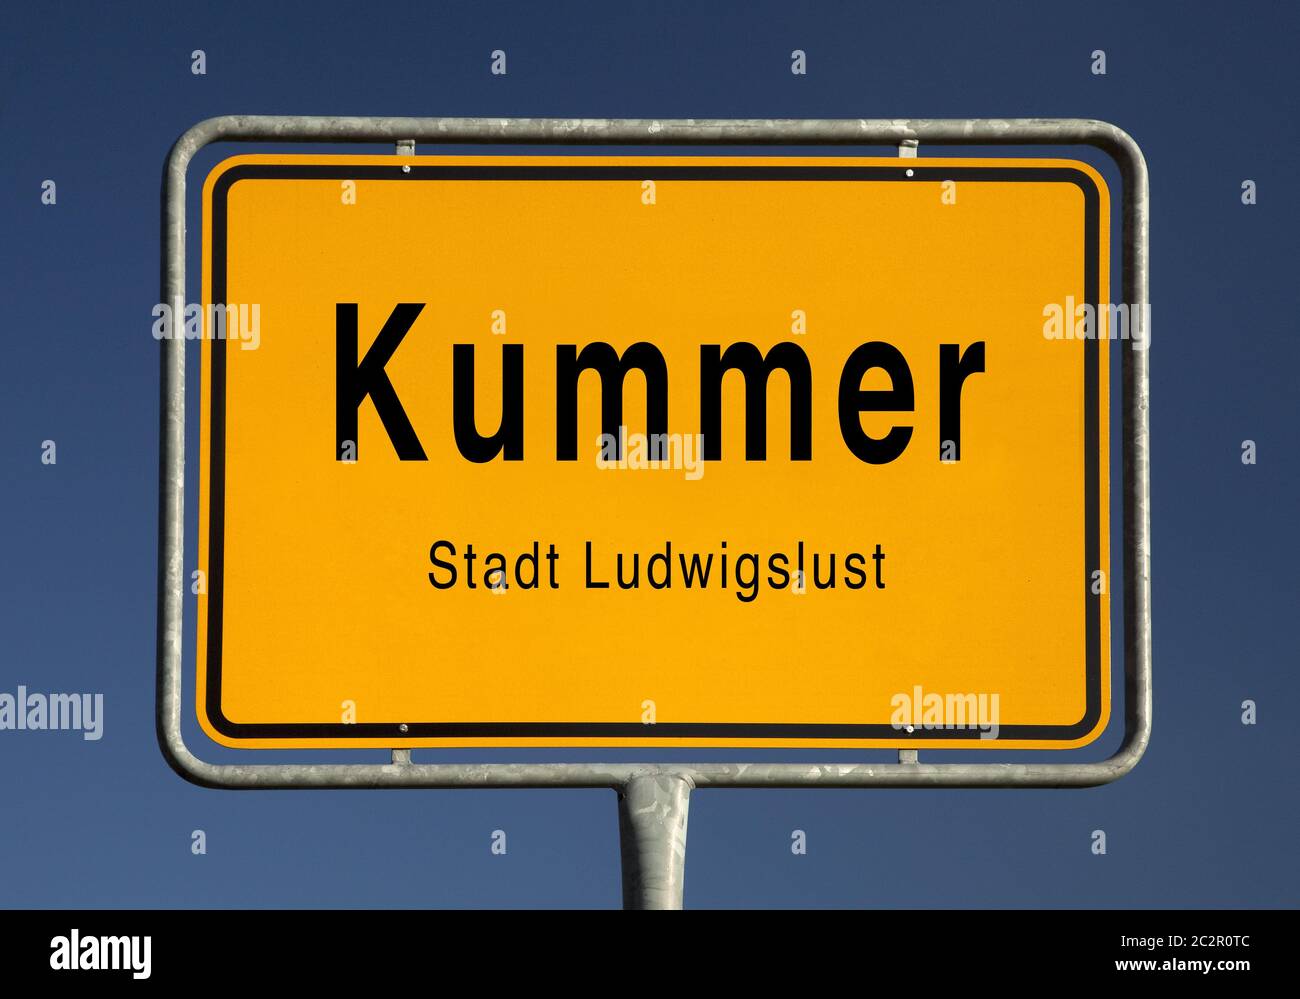 City limits sign of Kummer, district of the city Ludwigslust, Mecklenburg-Western Pomerania, Germany Stock Photo